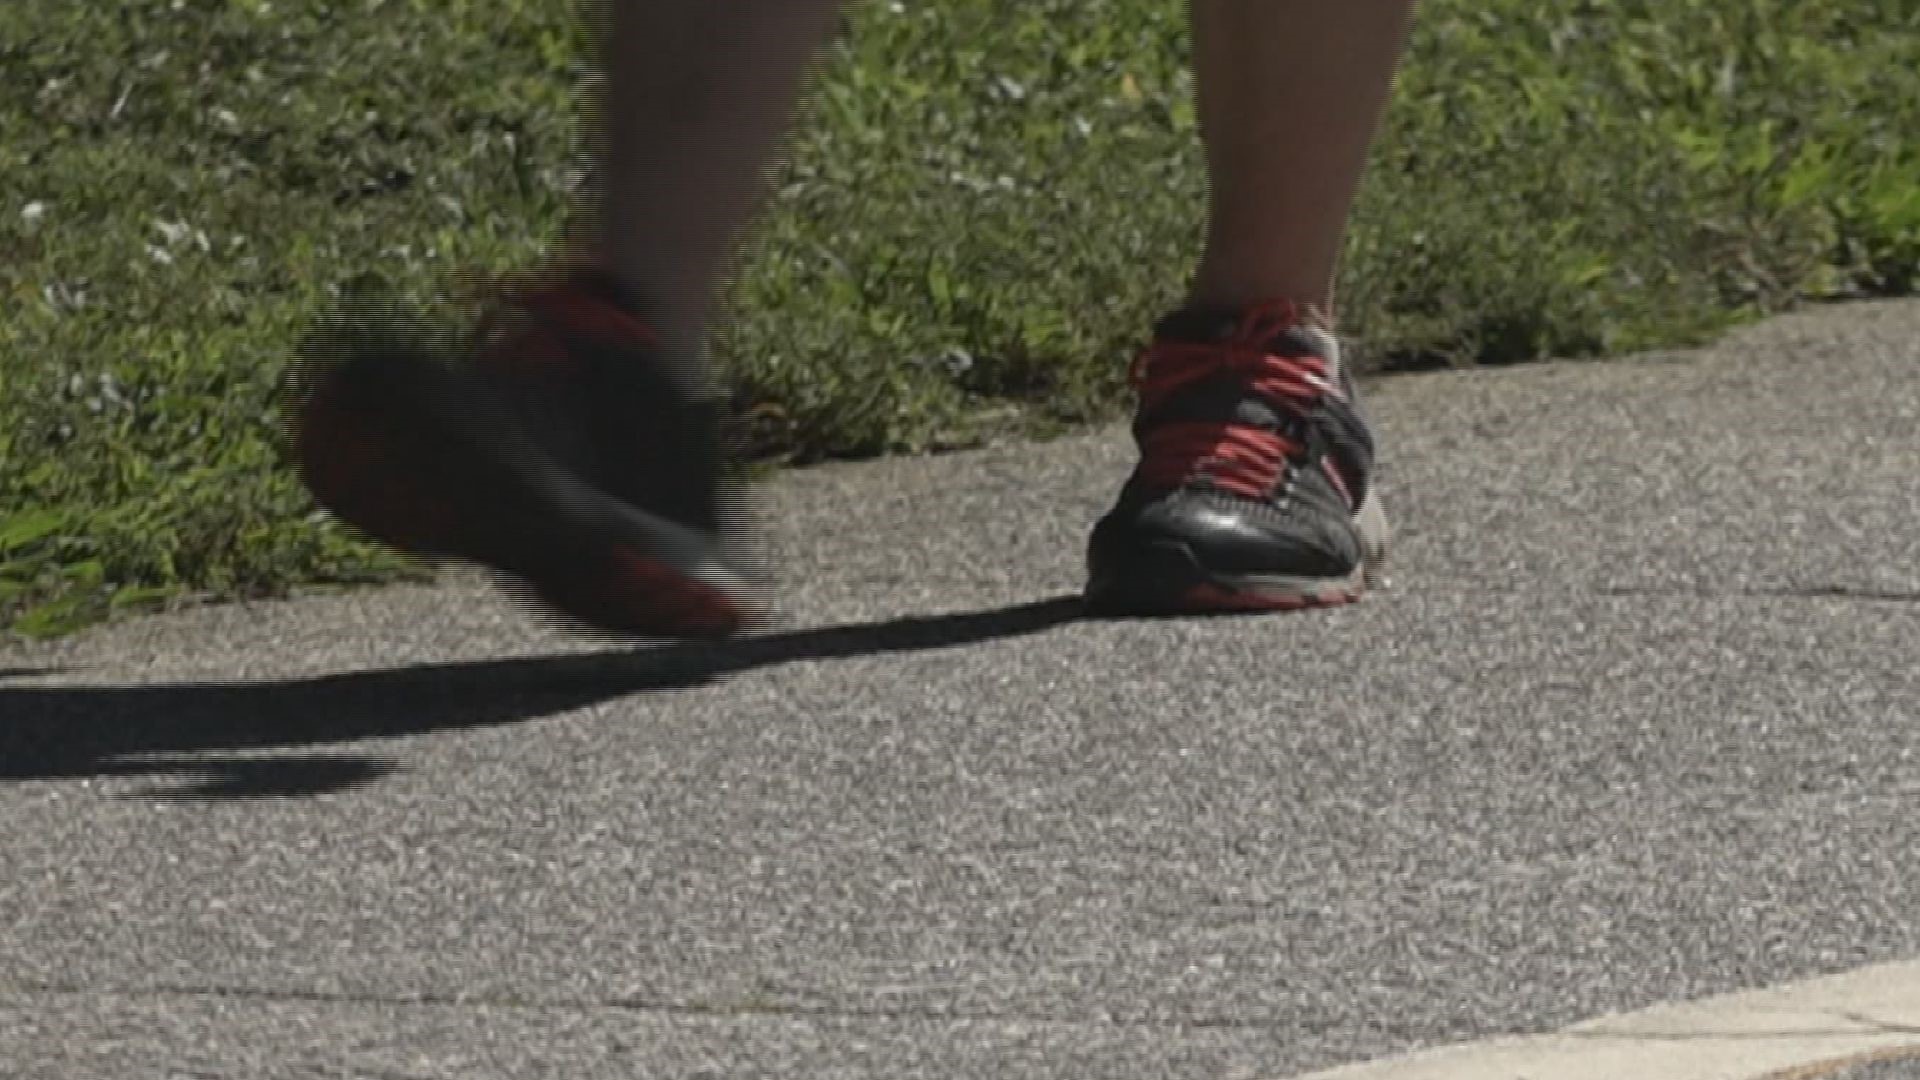 F-3 is a men’s fitness group in Greensboro. It wants to make sure women feel safe while running.